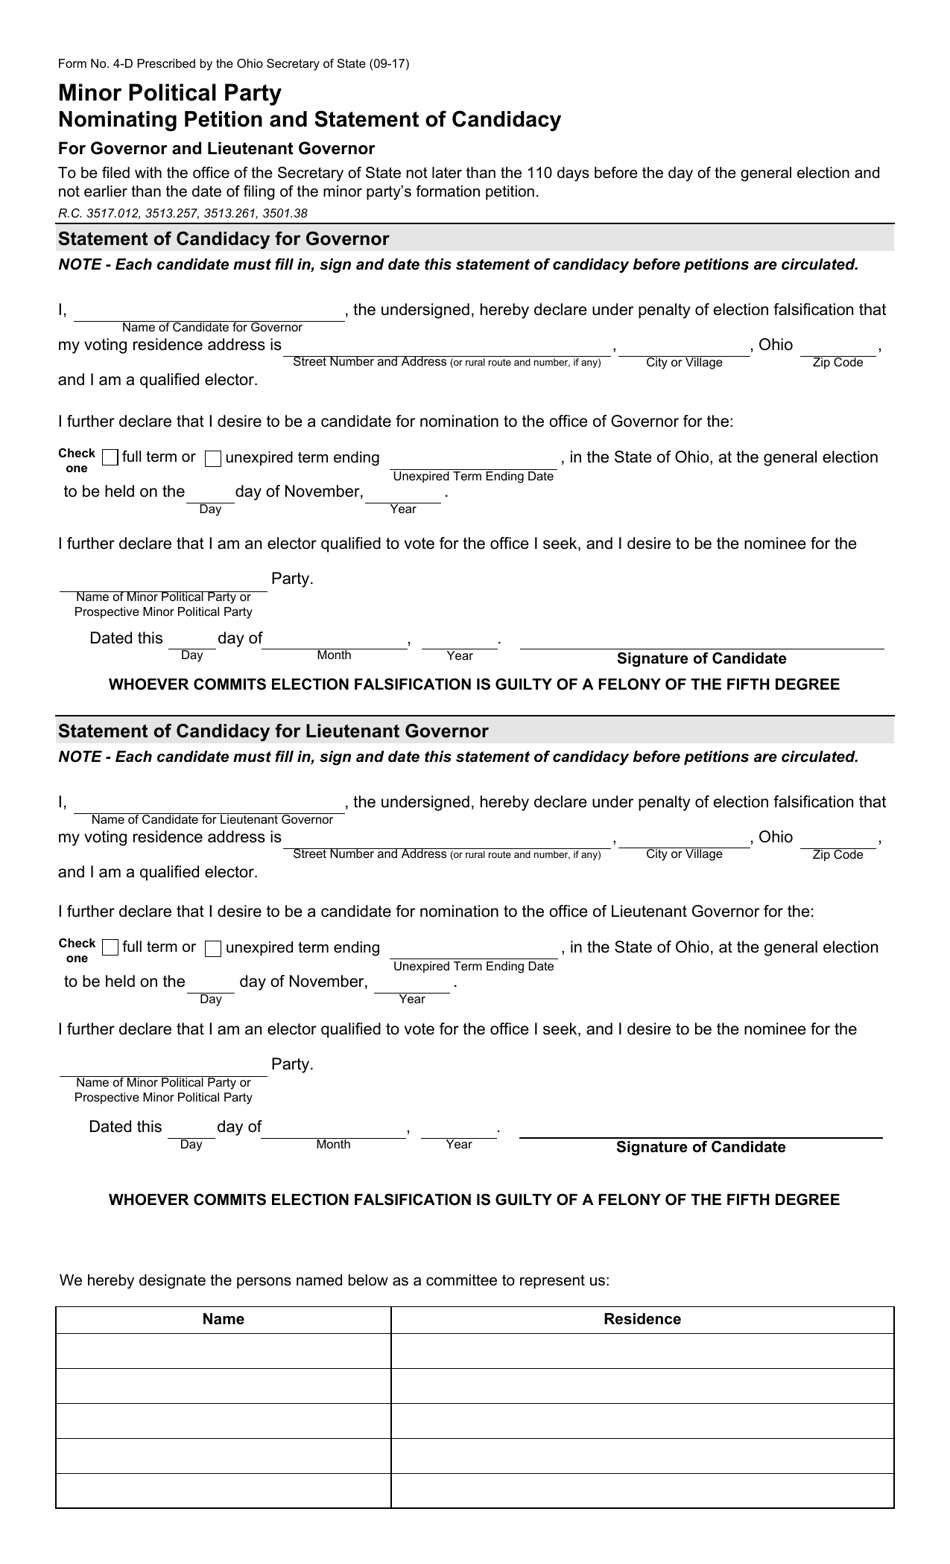 Form 4-D Minor Political Party Nominating Petition and Statement of Candidacy for Governor and Lieutenant Governor - Ohio, Page 1